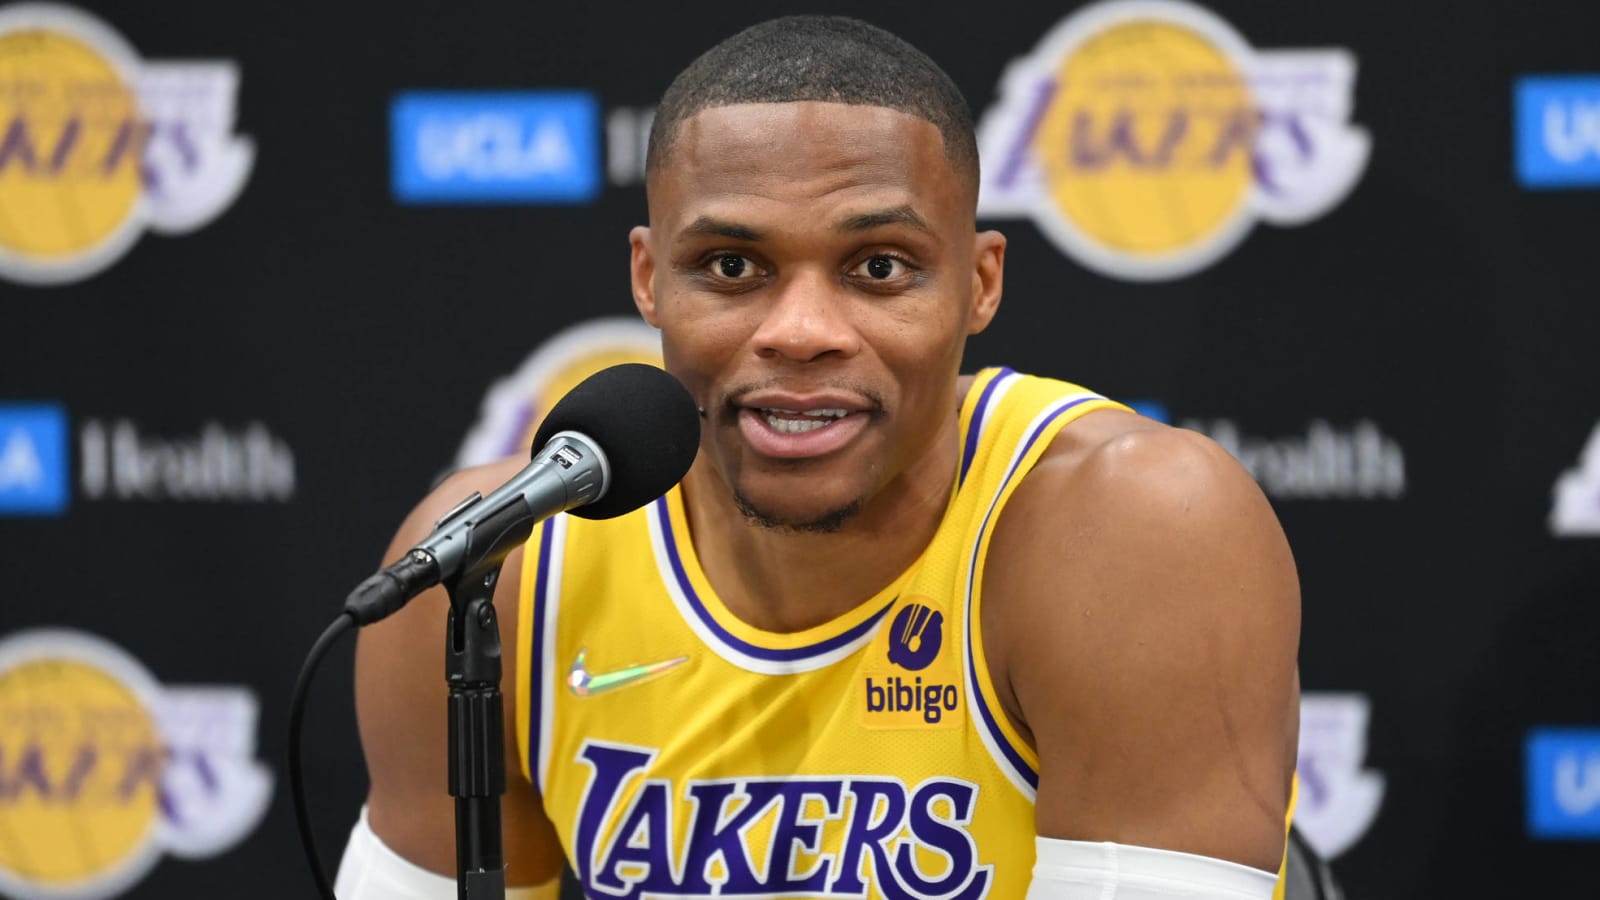 It was 'secretly' always Westbrook's plan to play for Lakers